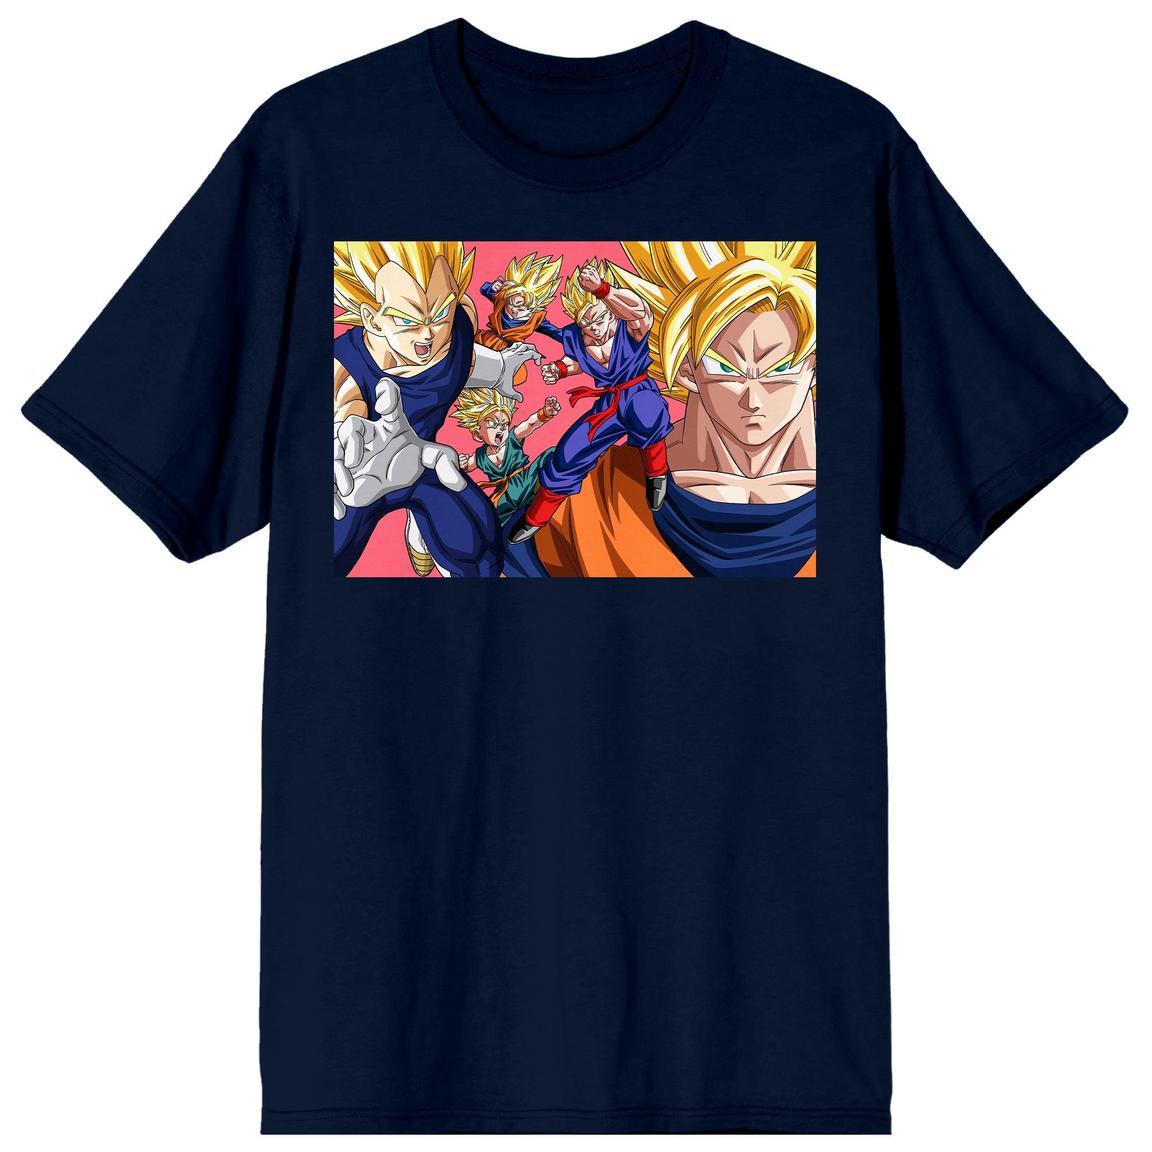 Dragon Ball Z Character Group Men's Anime Navy Blue Short Sleeve Graphic T-Shirt, Size: Large, Bioworld Merchandising